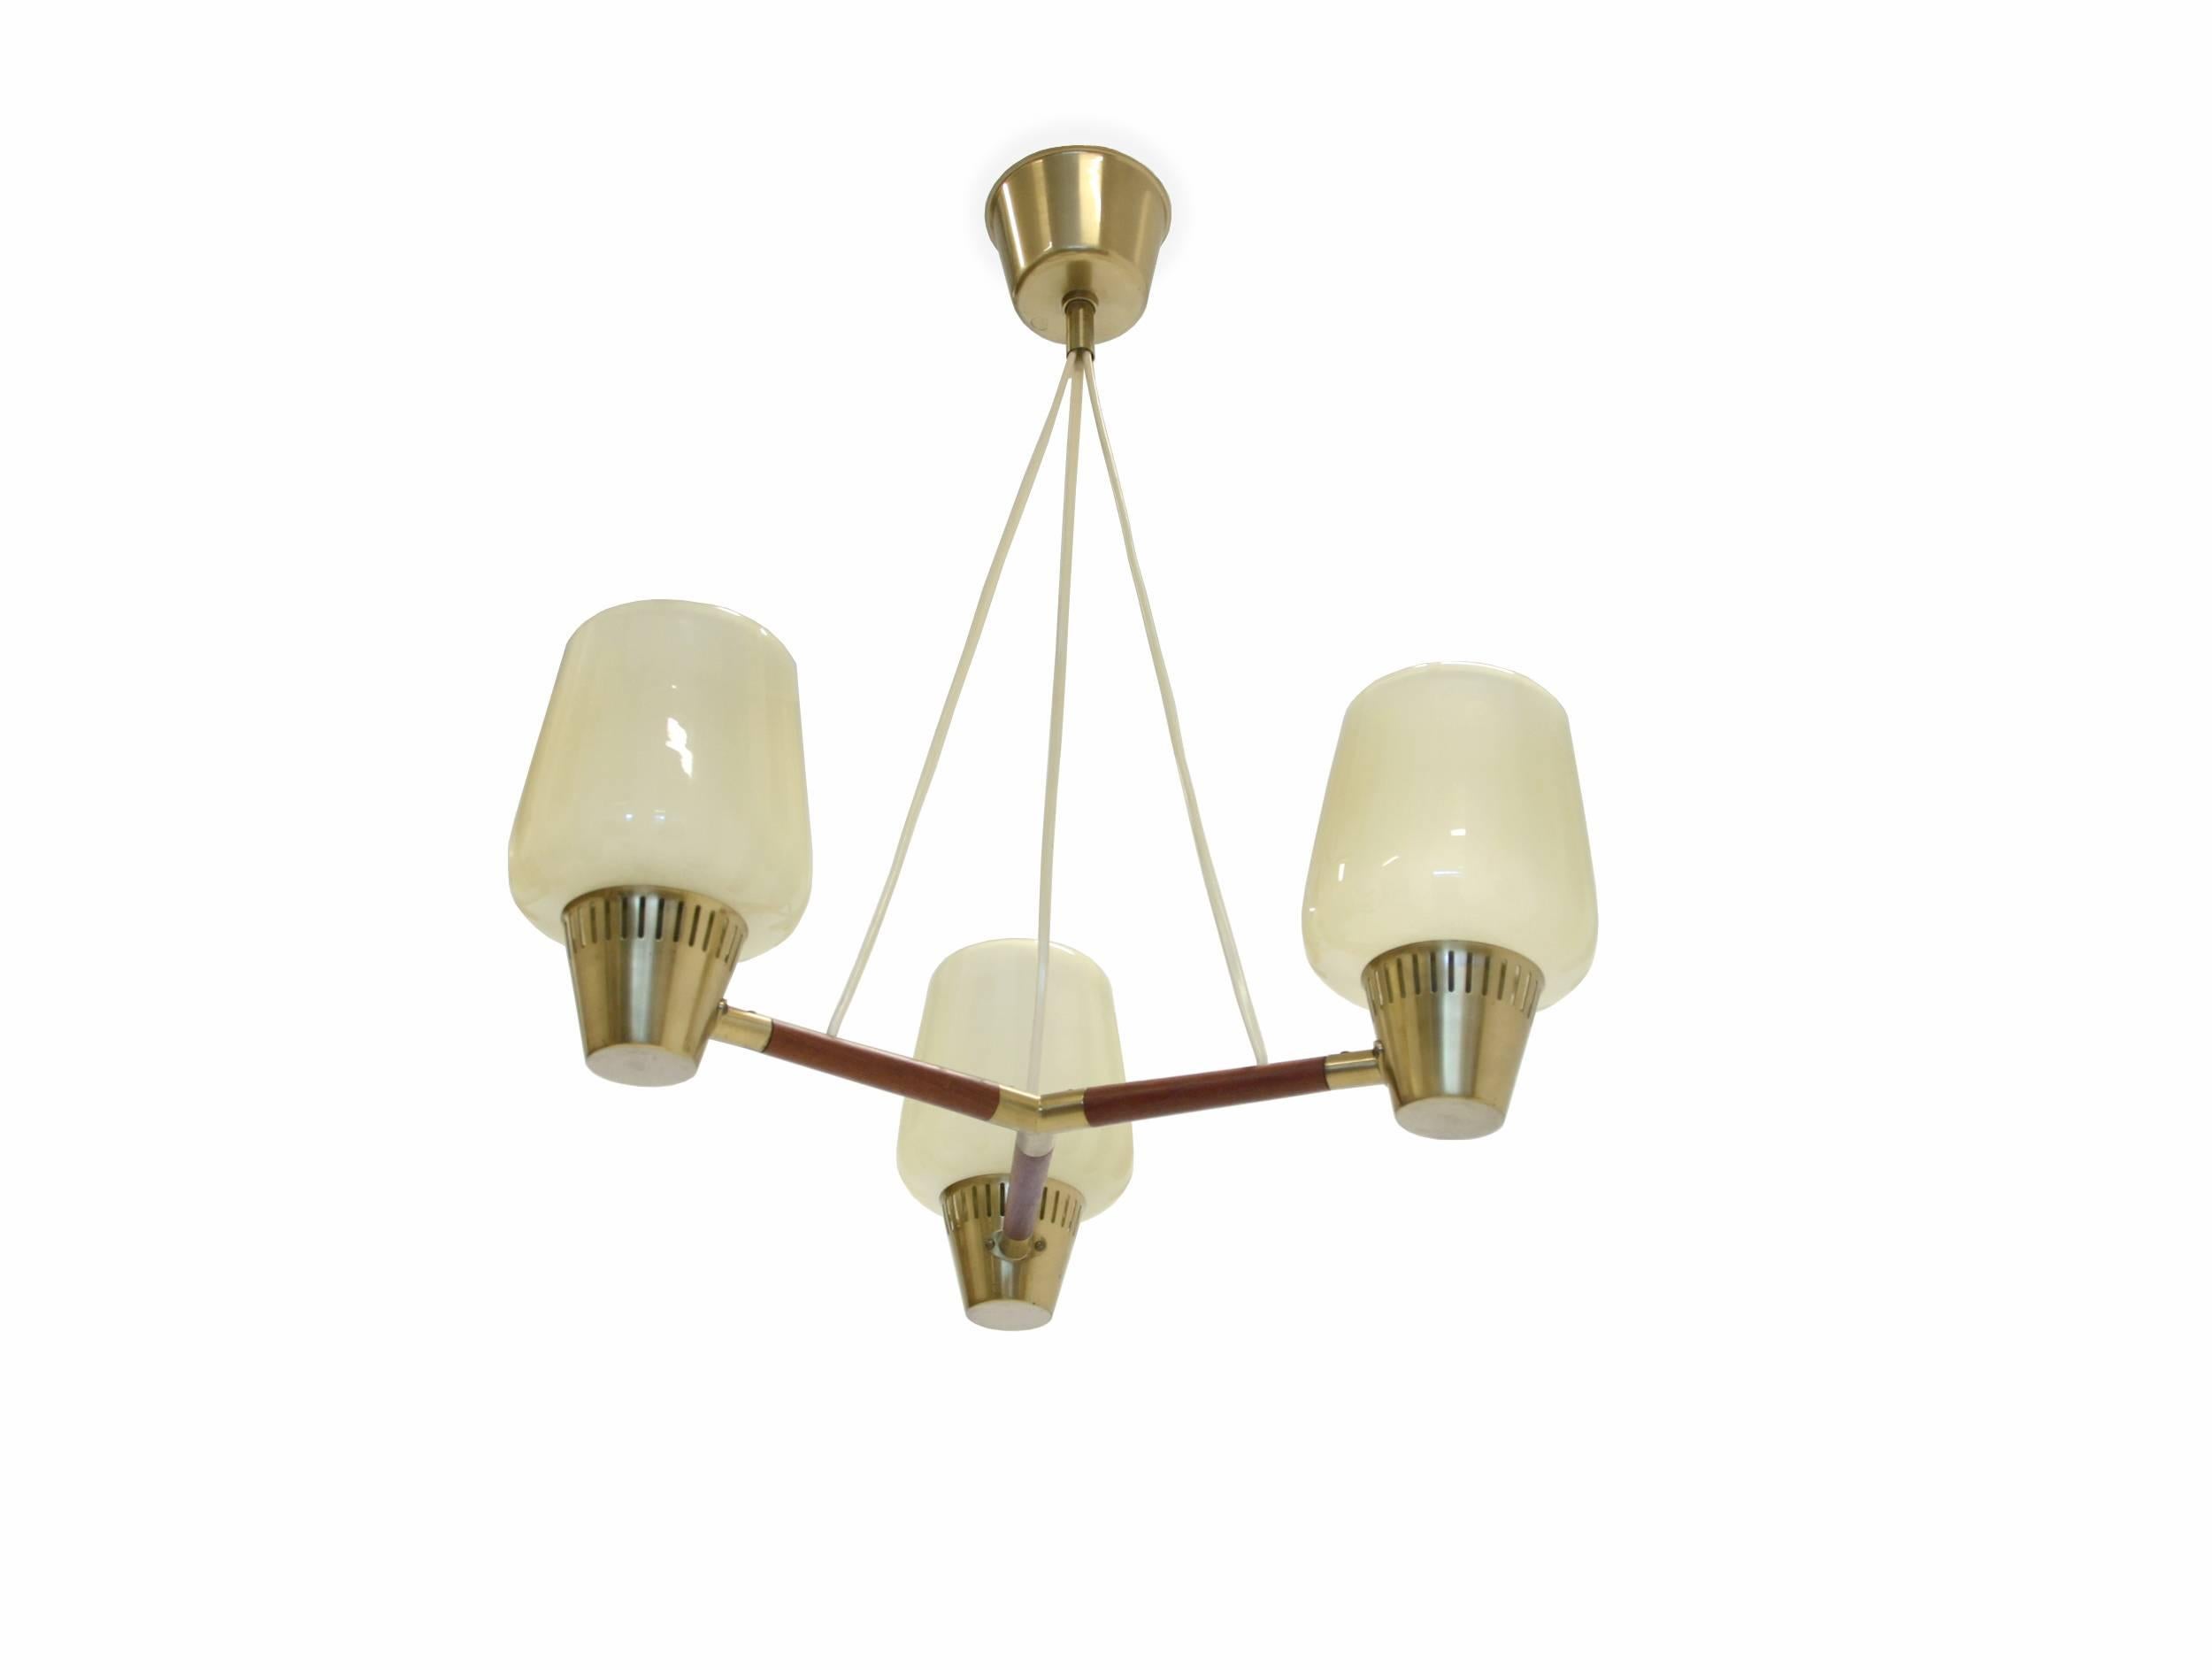 Wonderful and rare three-armed ceiling light on a teak frame with cupolas in glass. 
Designed and made in Sweden by ASEA, circa 1960s second half. The lamp is fully working and in excellent vintage condition.